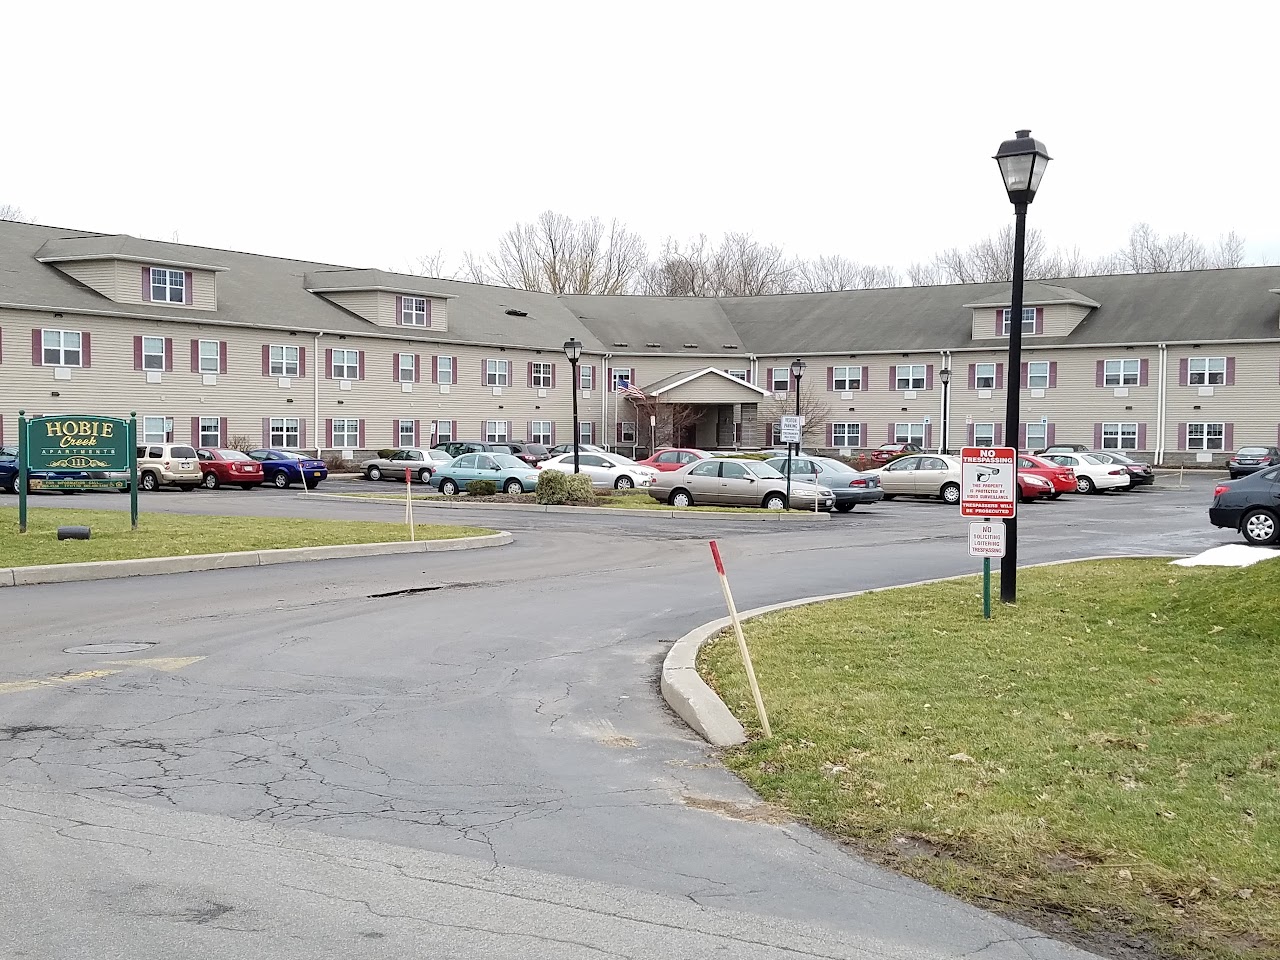 Photo of HOBIE CREEK APTS. Affordable housing located at 111 BROWER RD IRONDEQUOIT, NY 14622